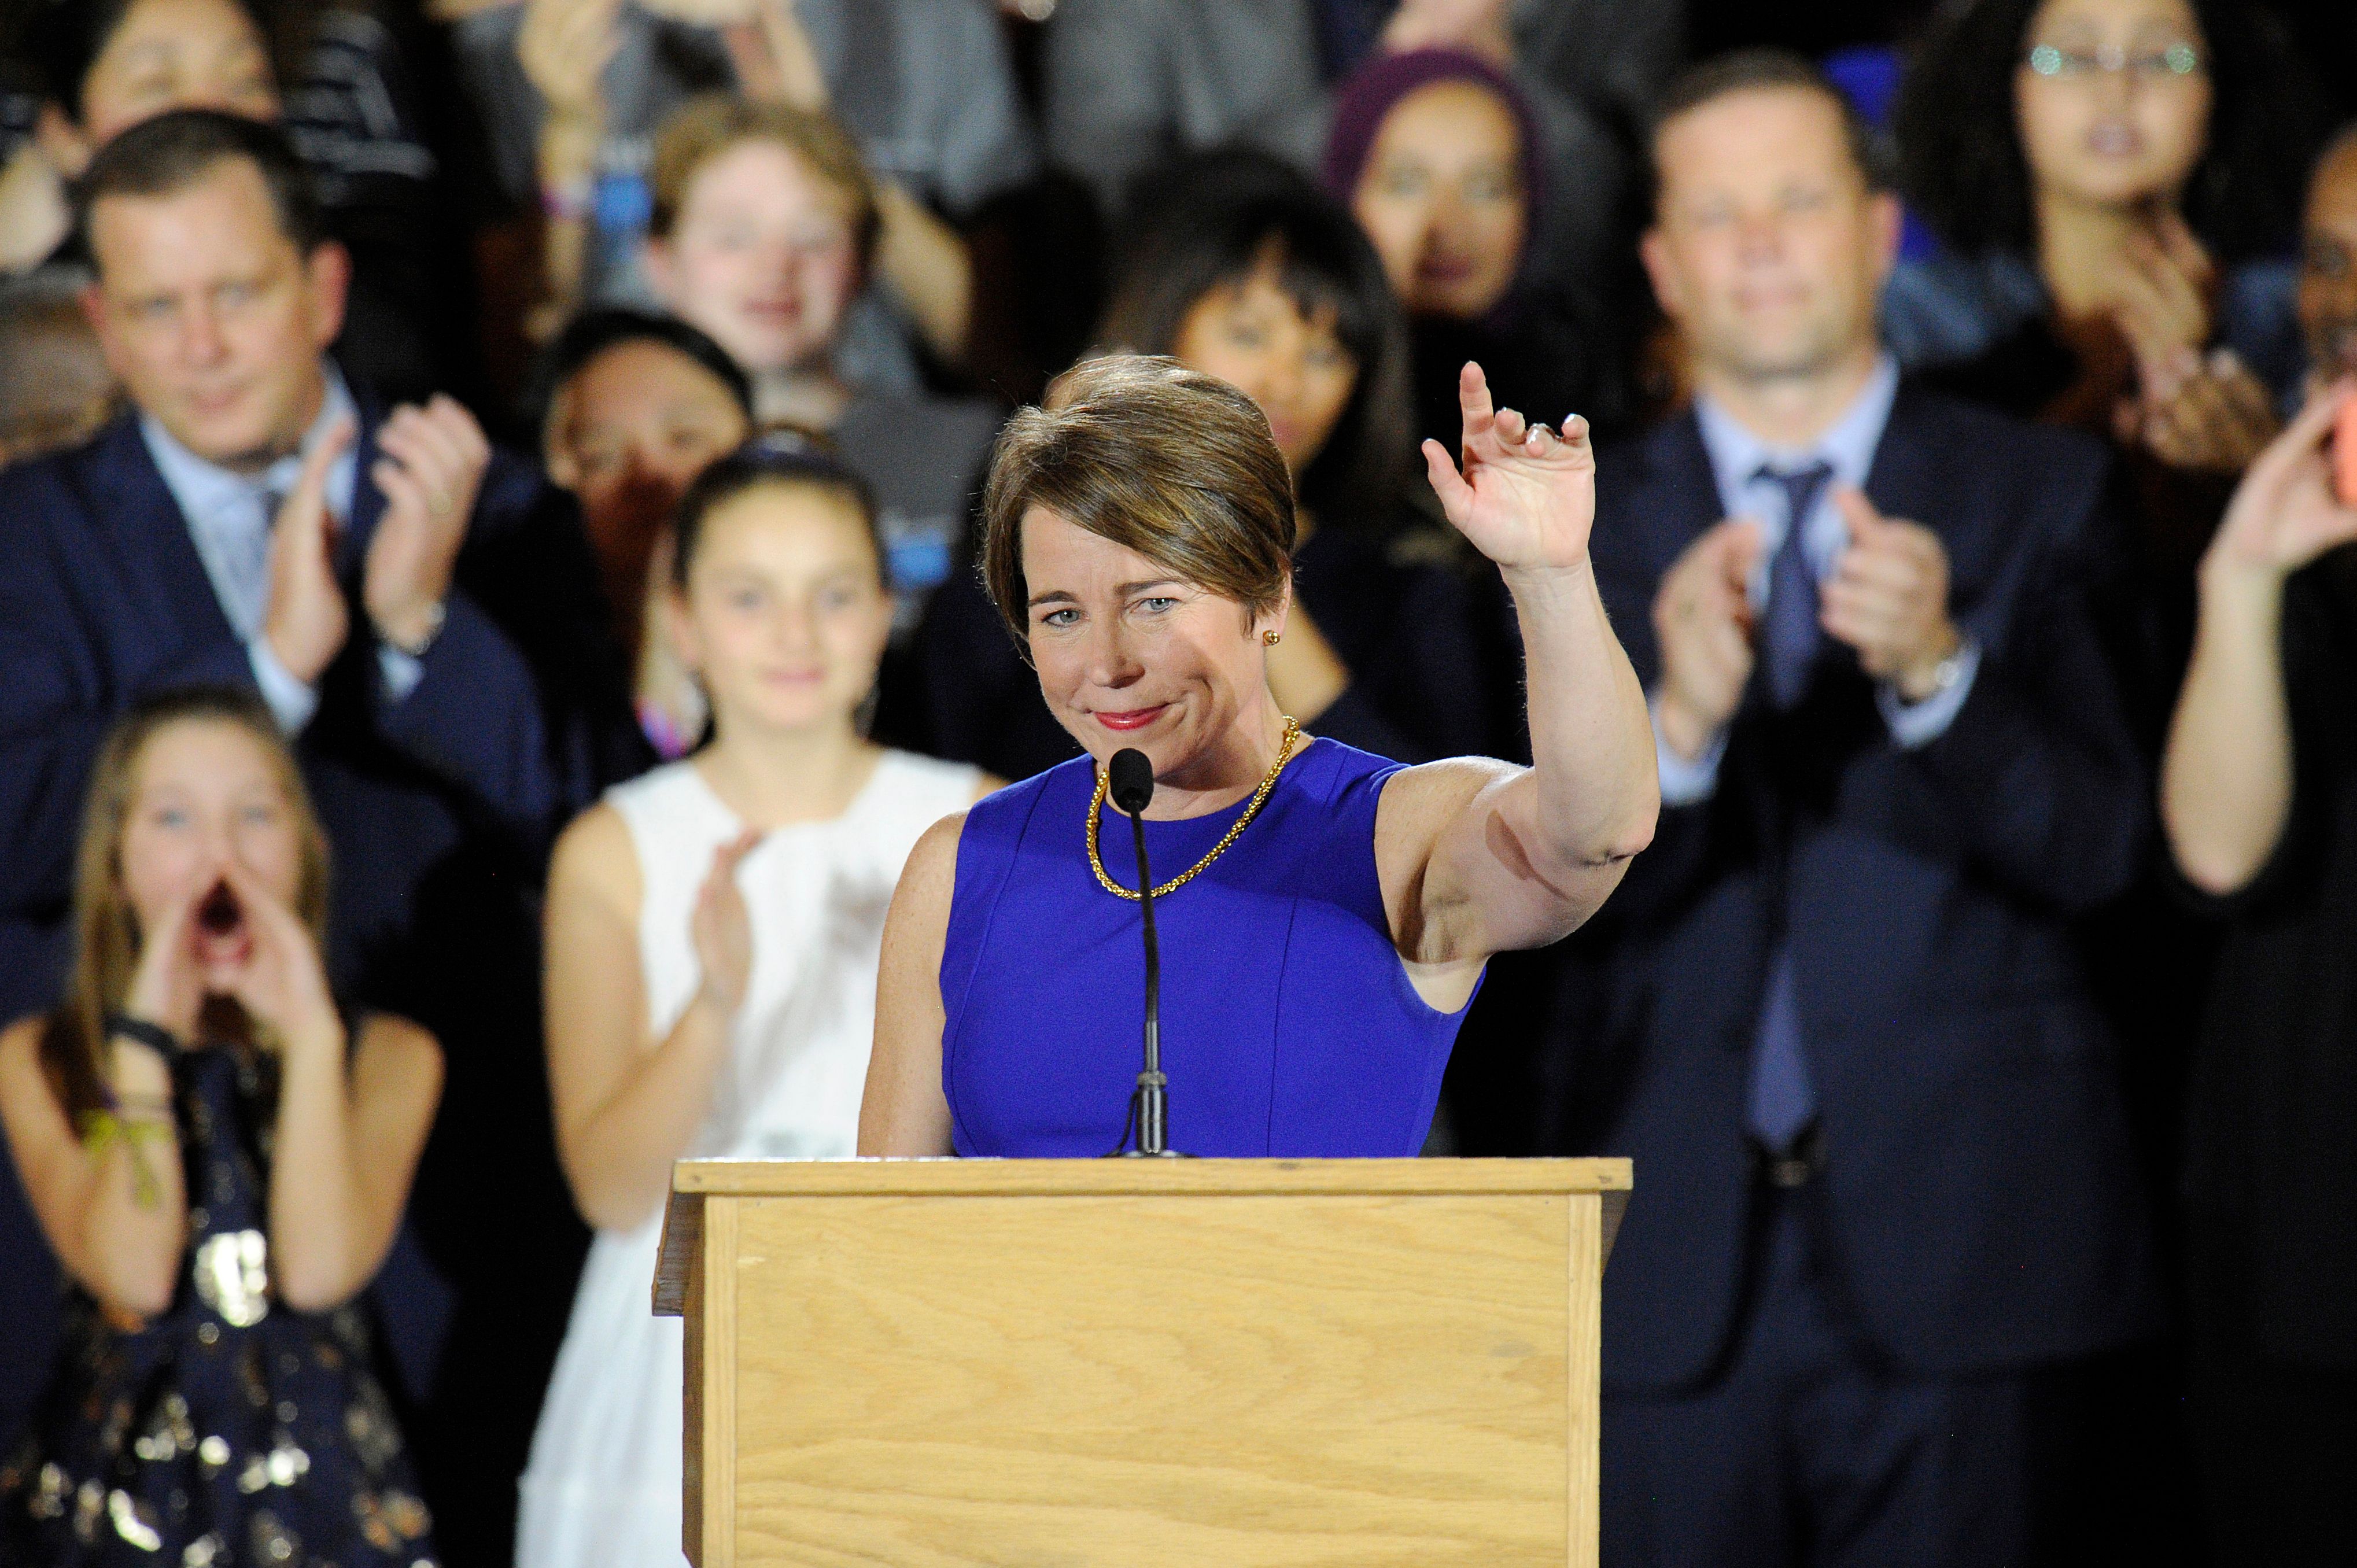 Massachusetts Attorney General Maura Healey waves as he addresses the crowd during the Election Day Massachusetts Democratic Coordinated Campaign Election Night Celebration at the Fairmont Copley Hotel in Boston on November 6, 2018. (JOSEPH PREZIOSO/AFP/Getty Images)